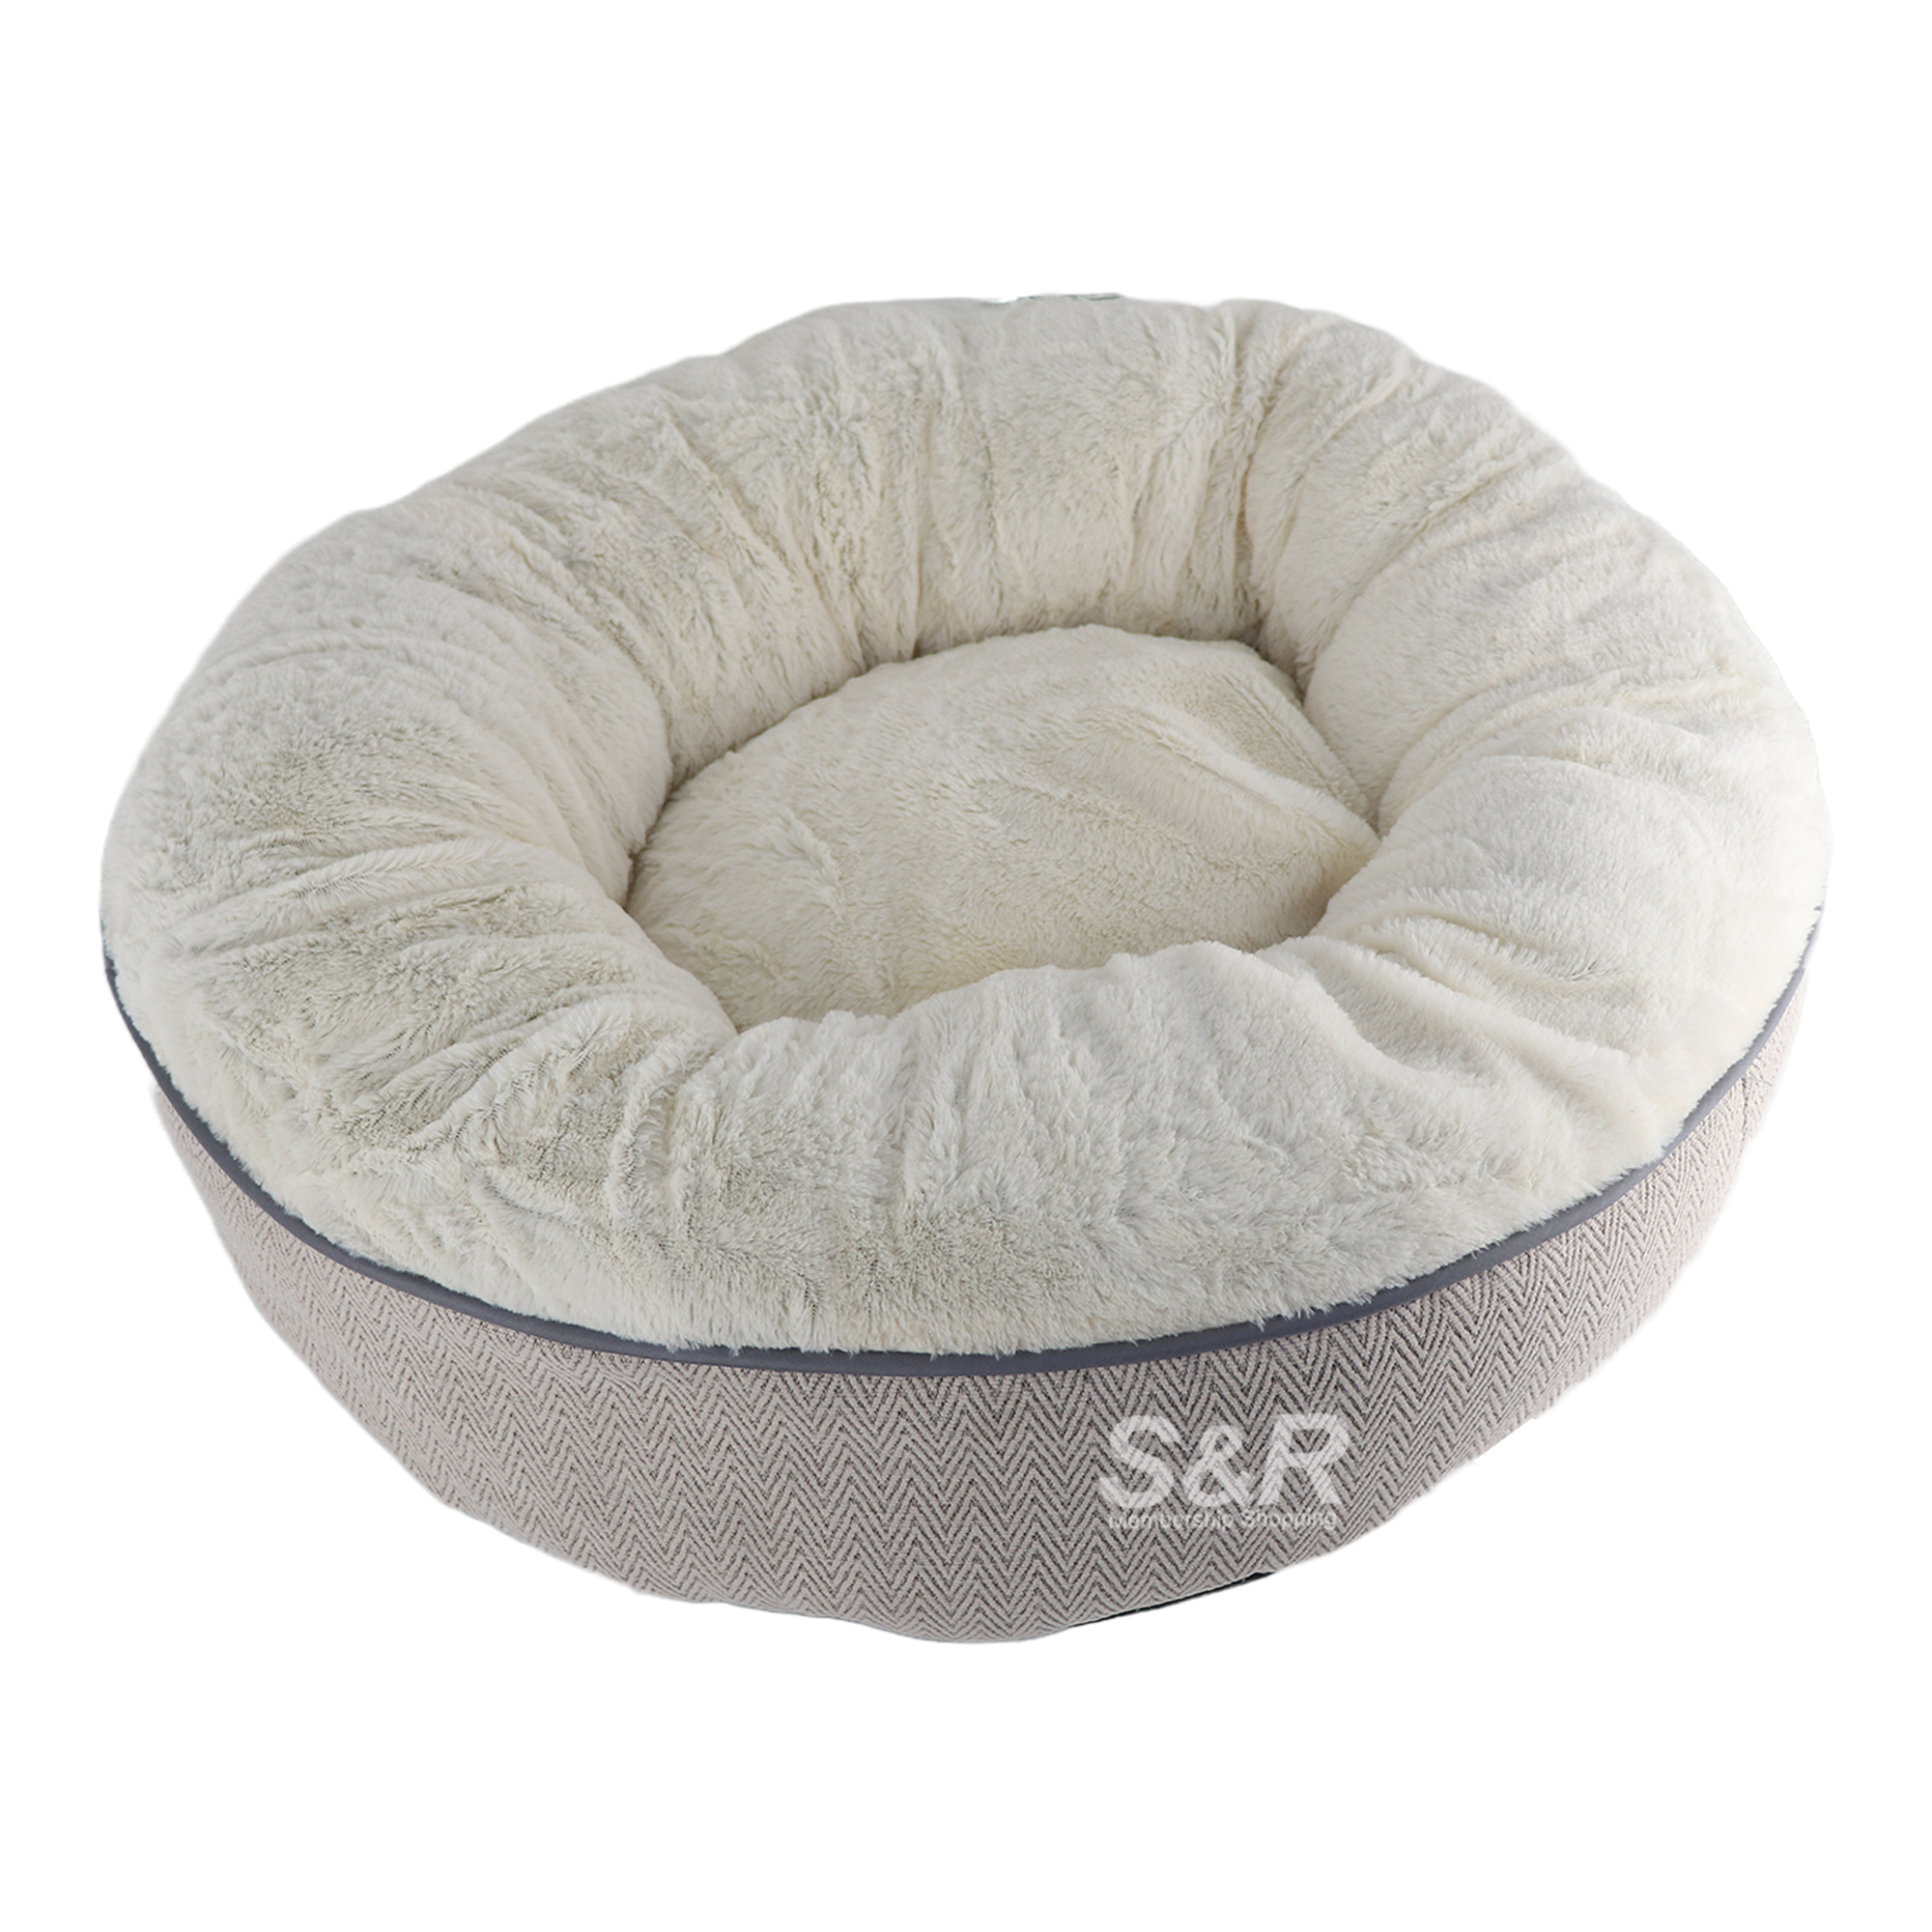 Pur Luxe Cuddler Pet Bed 1pc